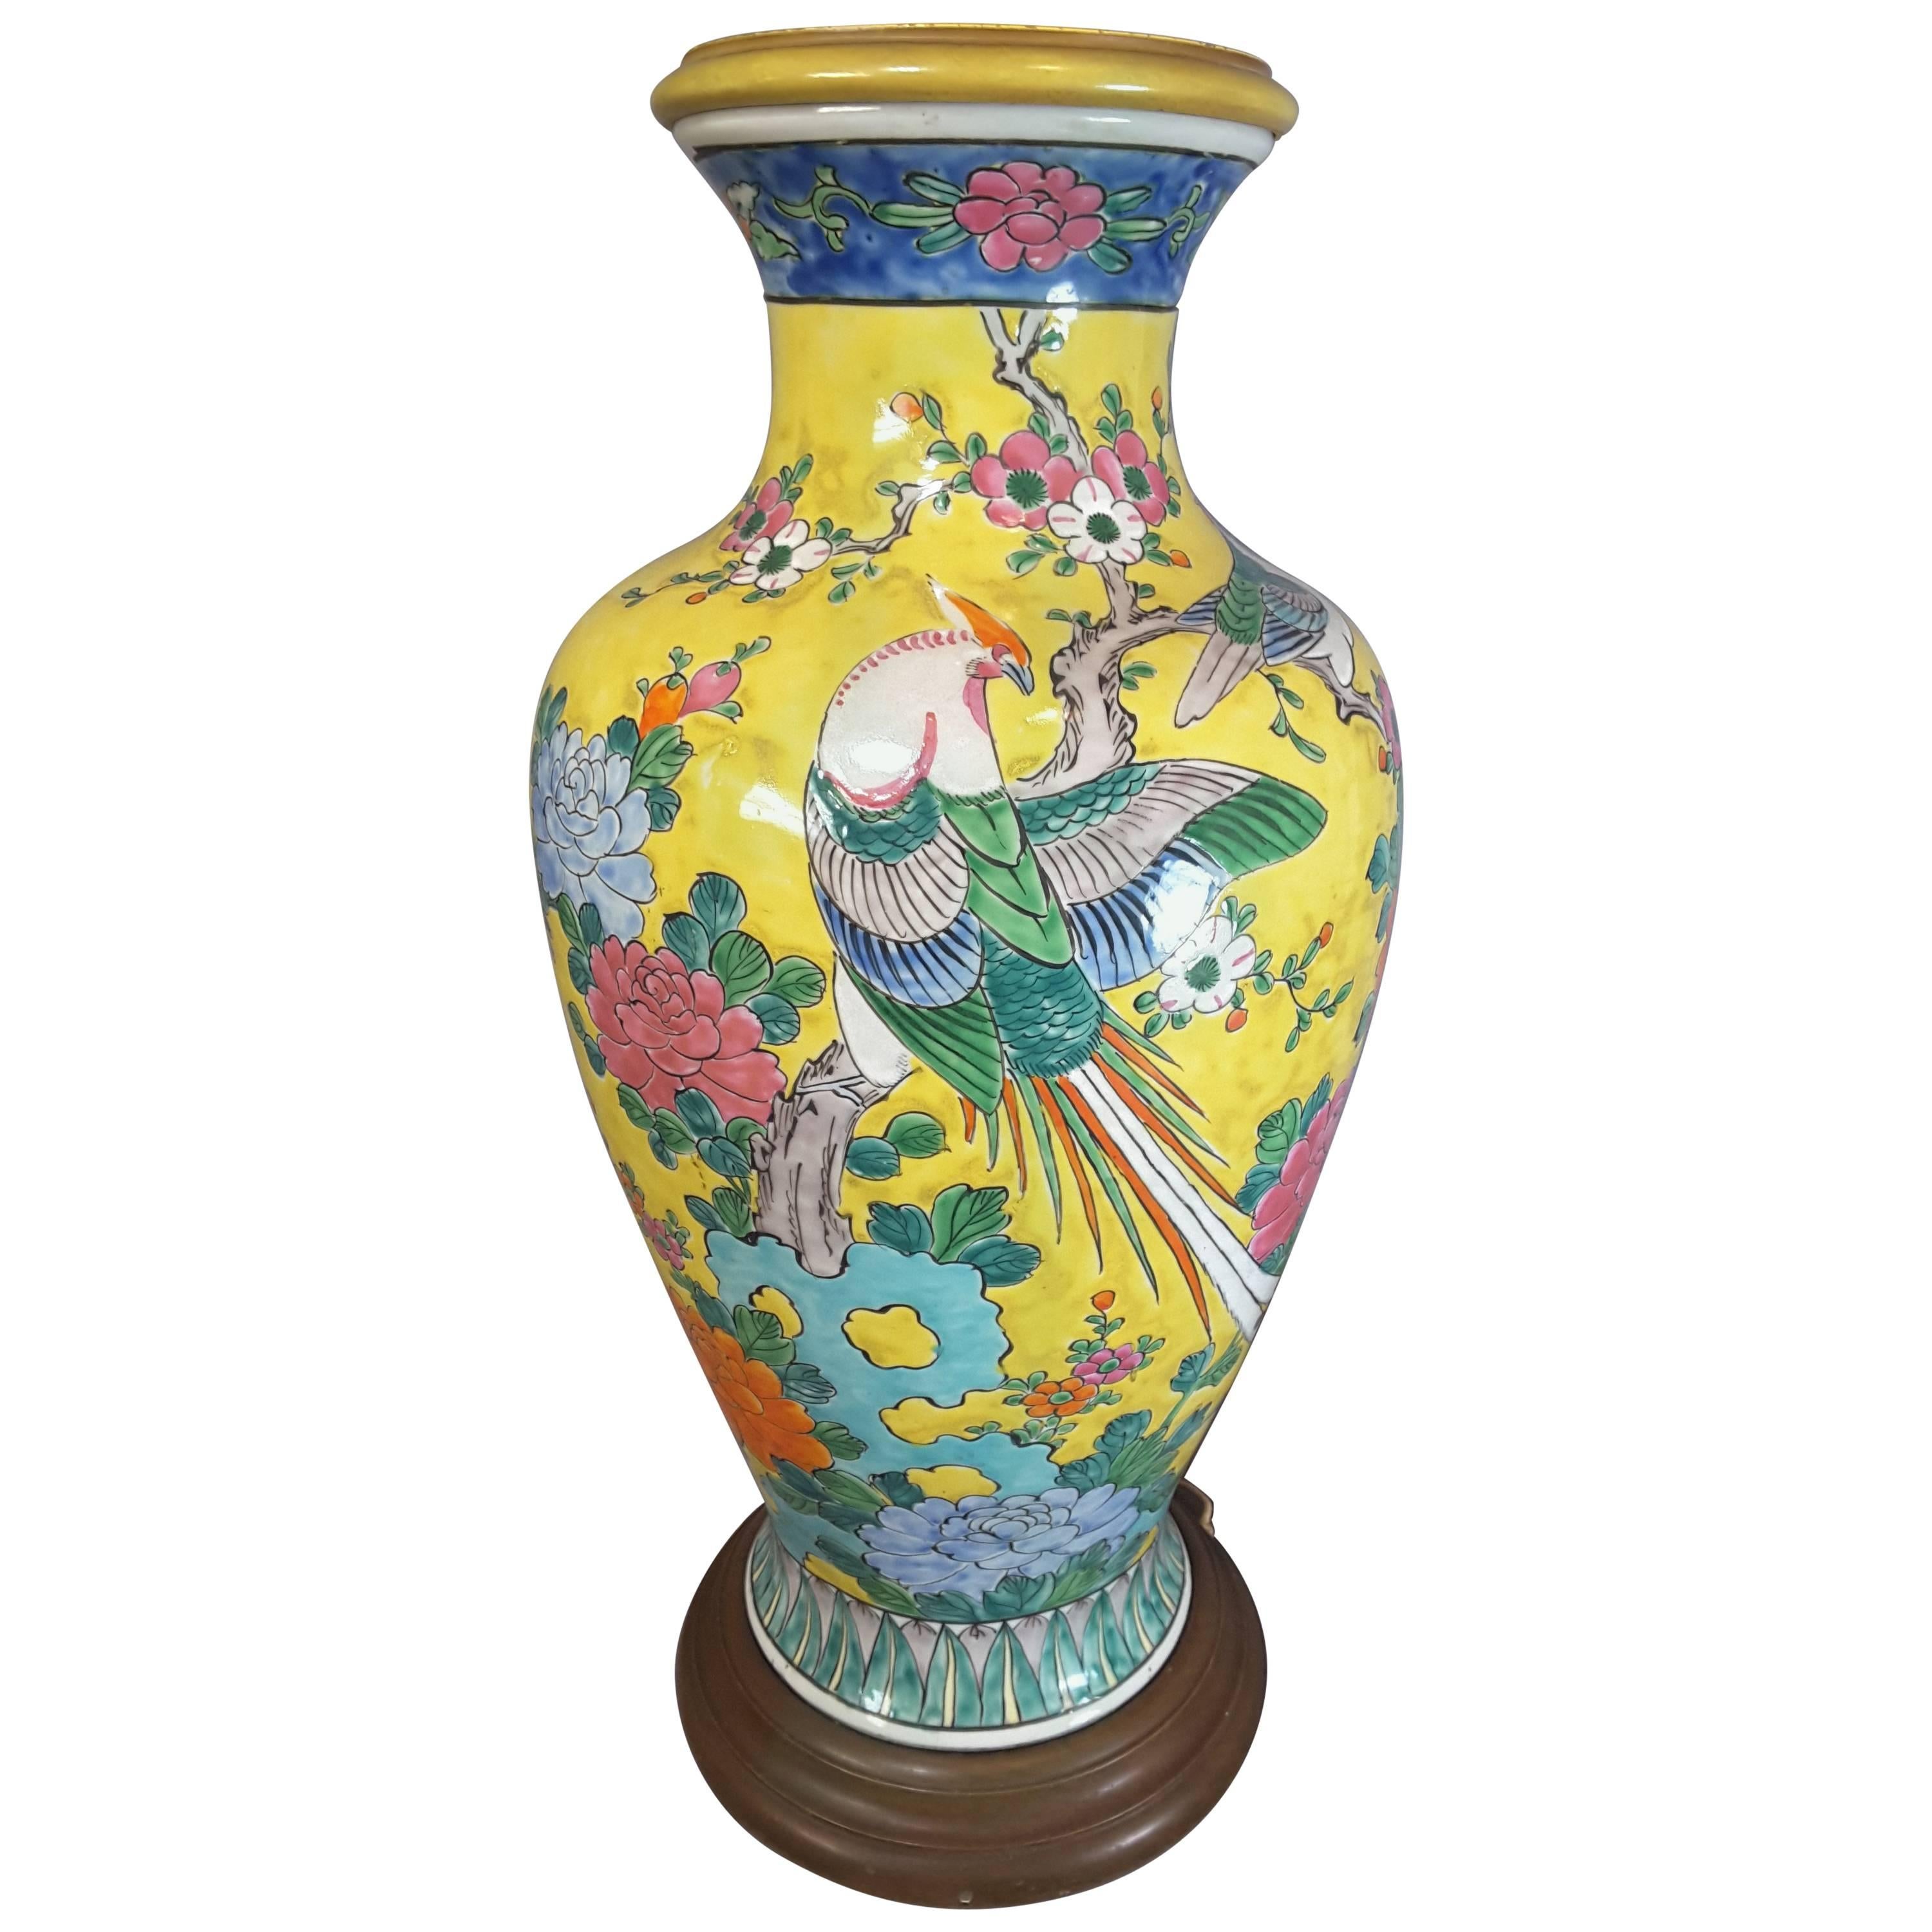 Chinese Imperial Yellow Large Table Lamp with Pheasant, Birds, Flowers & Foliage